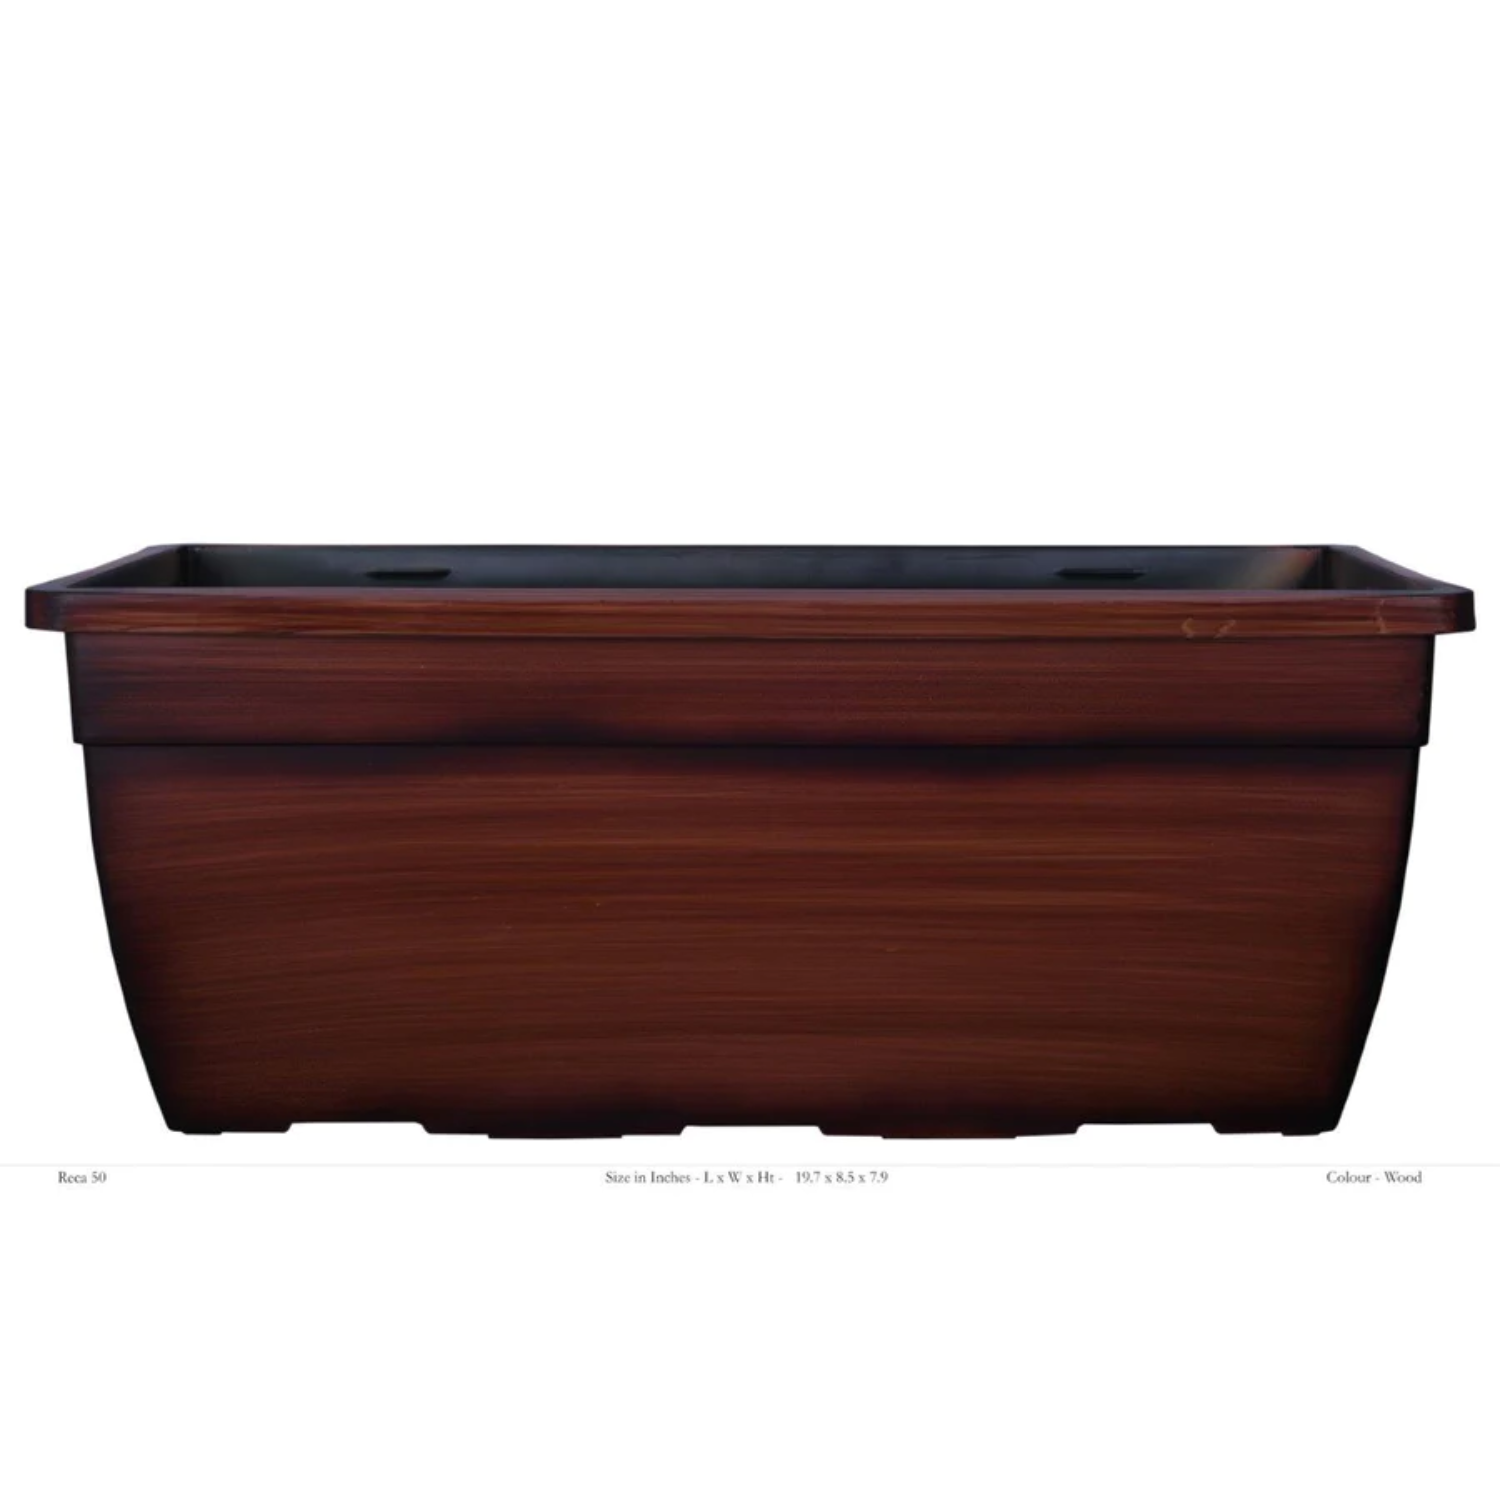 Reca 50cm Wooden Finish Rectangle Plastic Pot (Without Self-Watering Kit)